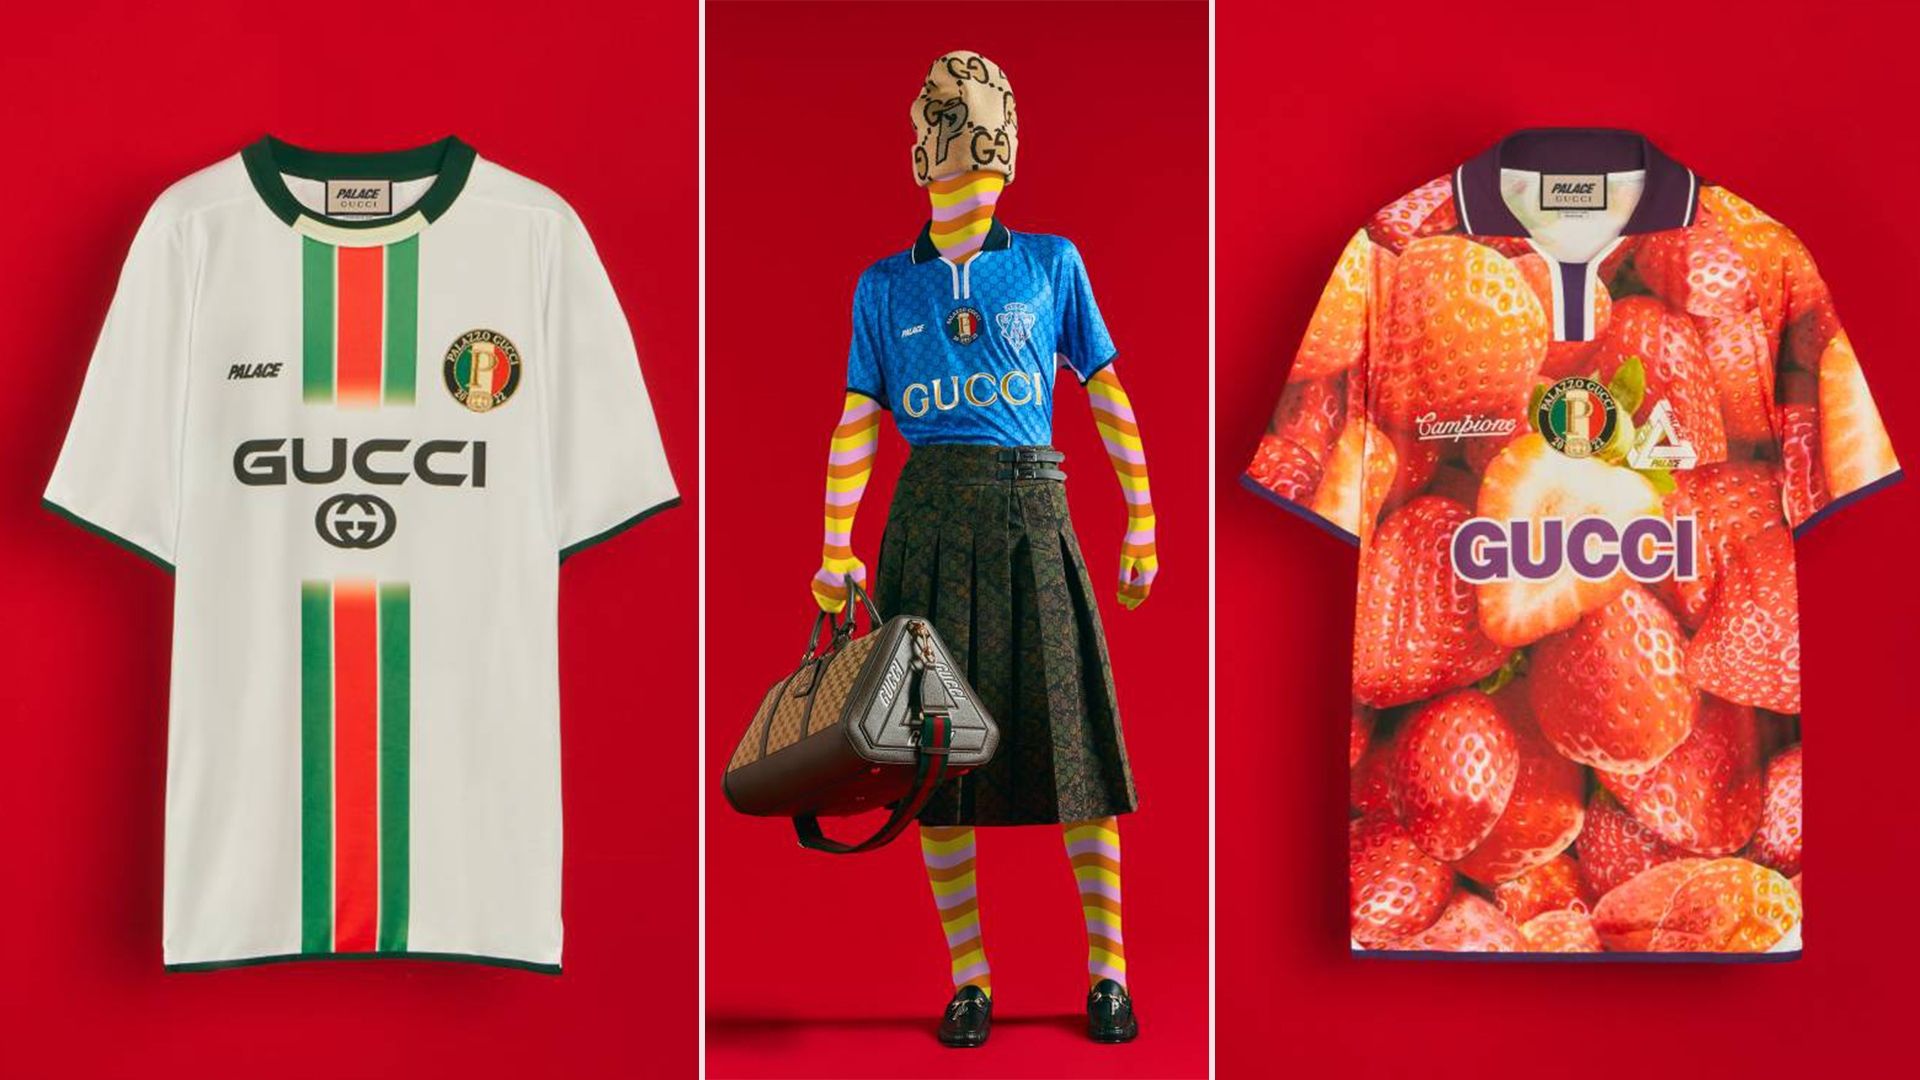 Did Palace and Gucci just drop this year's best football shirts